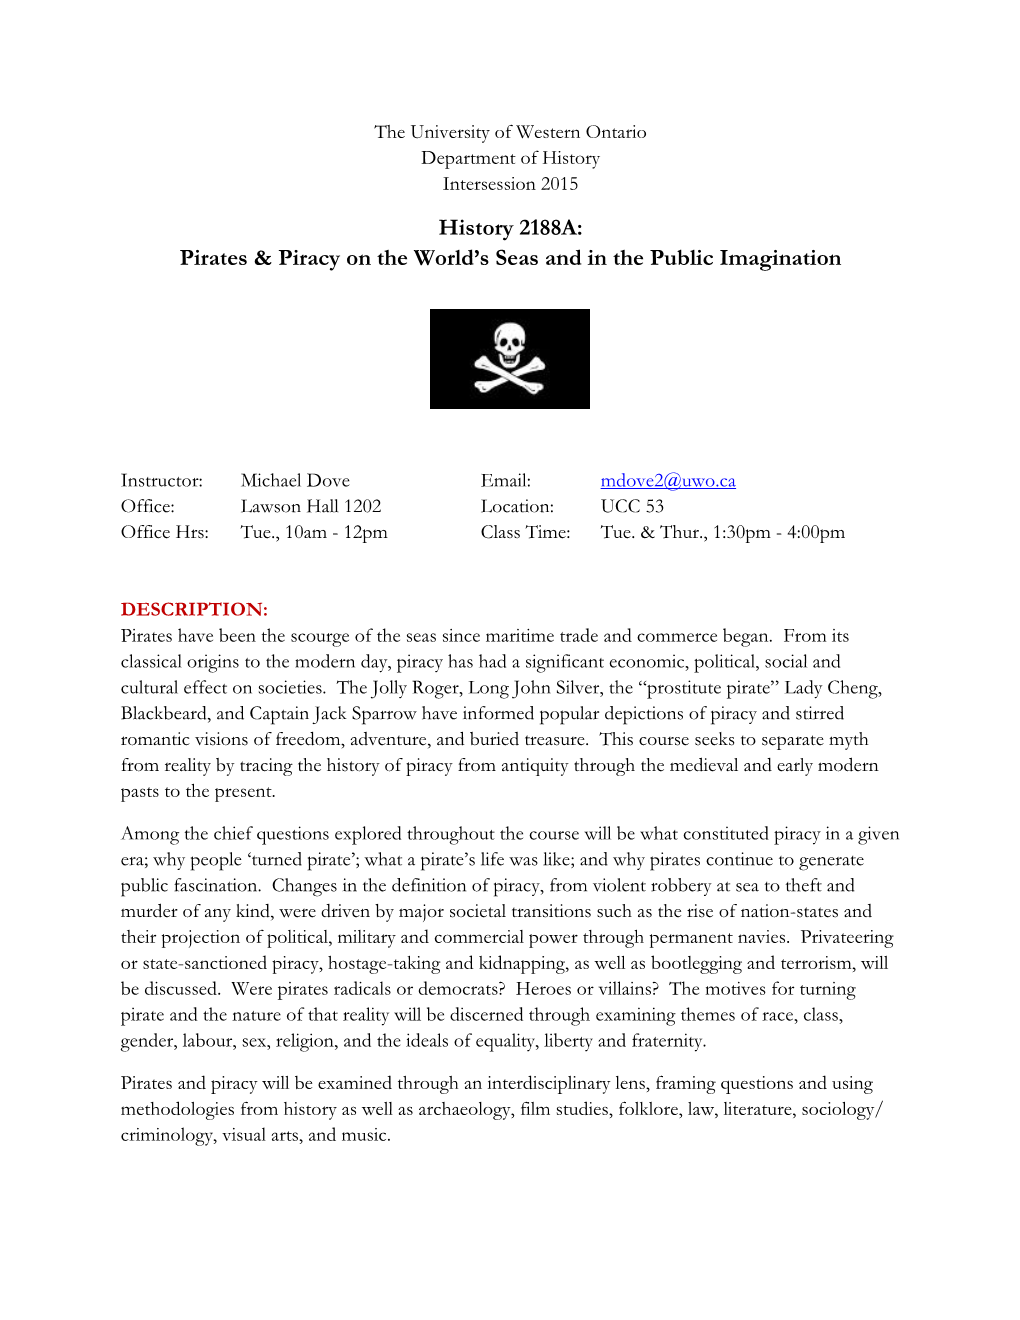 History 2188A: Pirates & Piracy on the World's Seas and in the Public Imagination